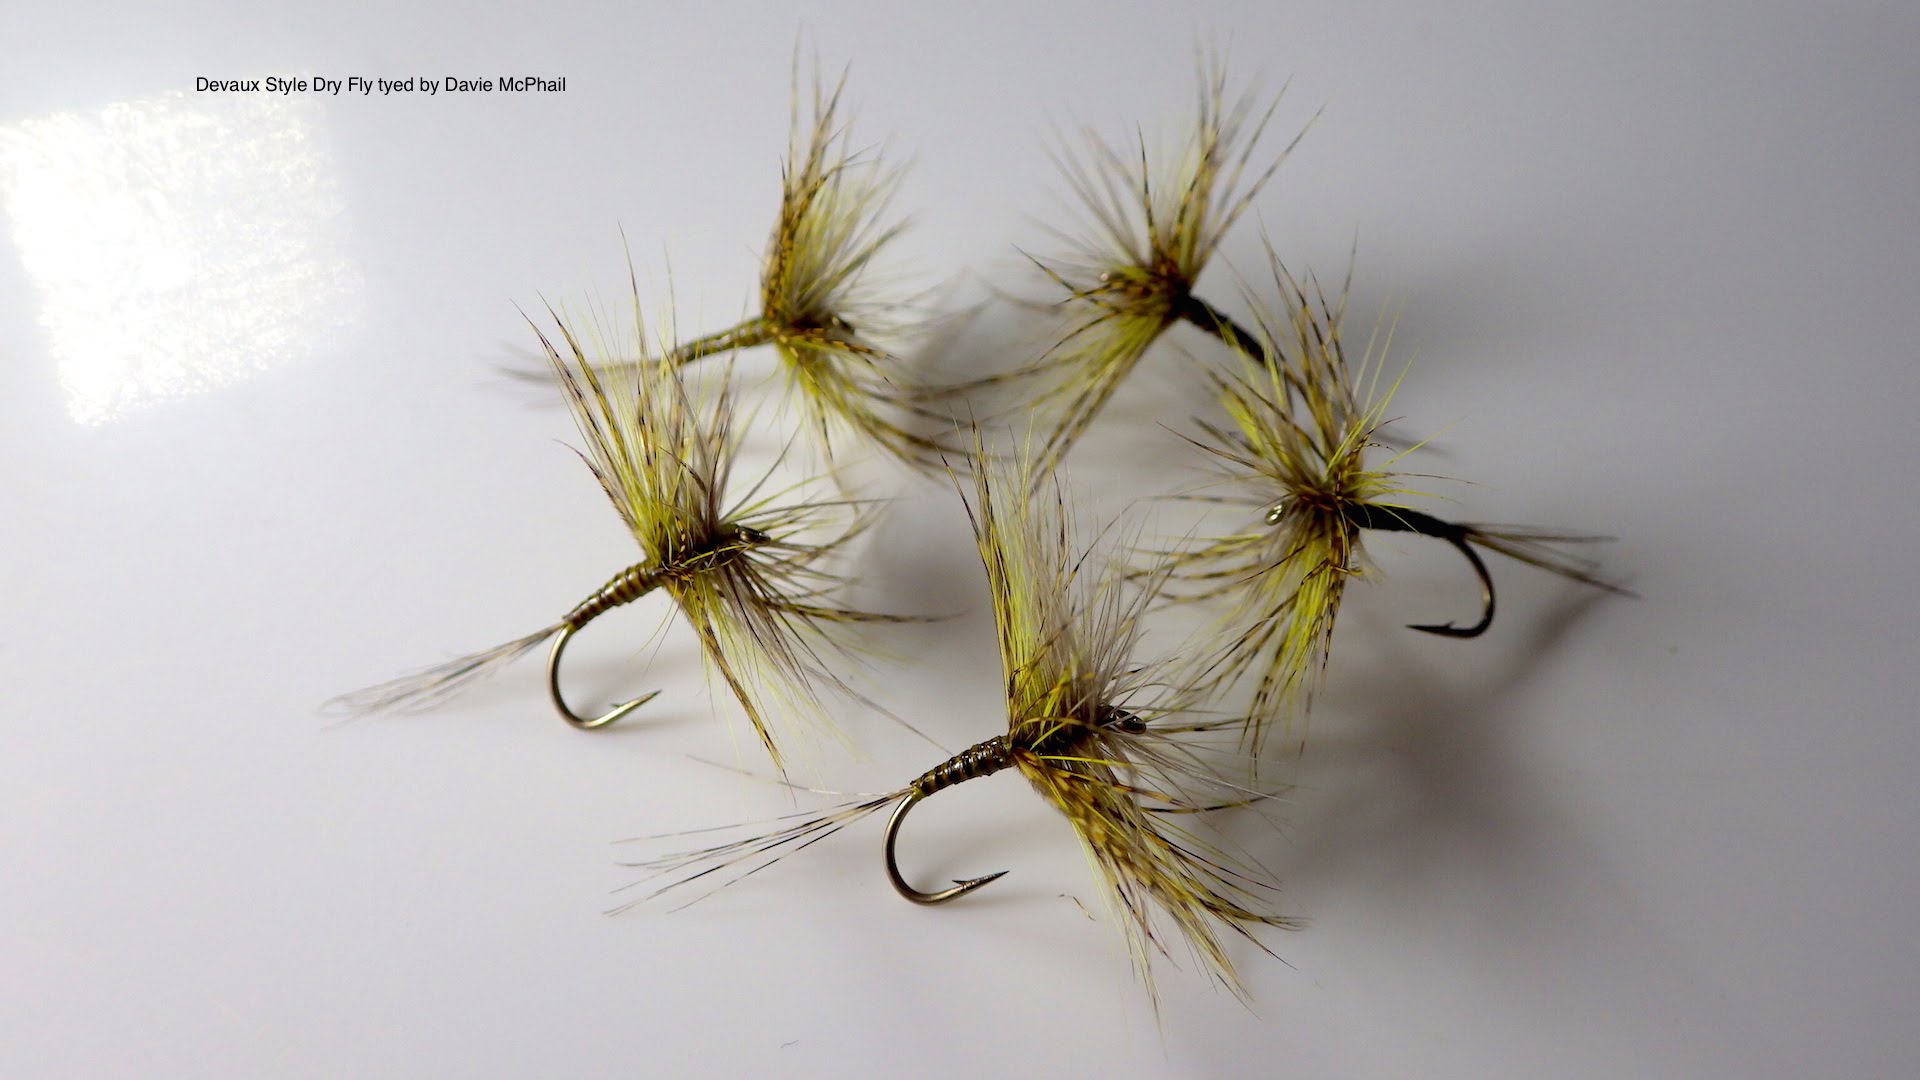 Tying the Devaux Style Dry Fly with Davie McPhail - YouTube